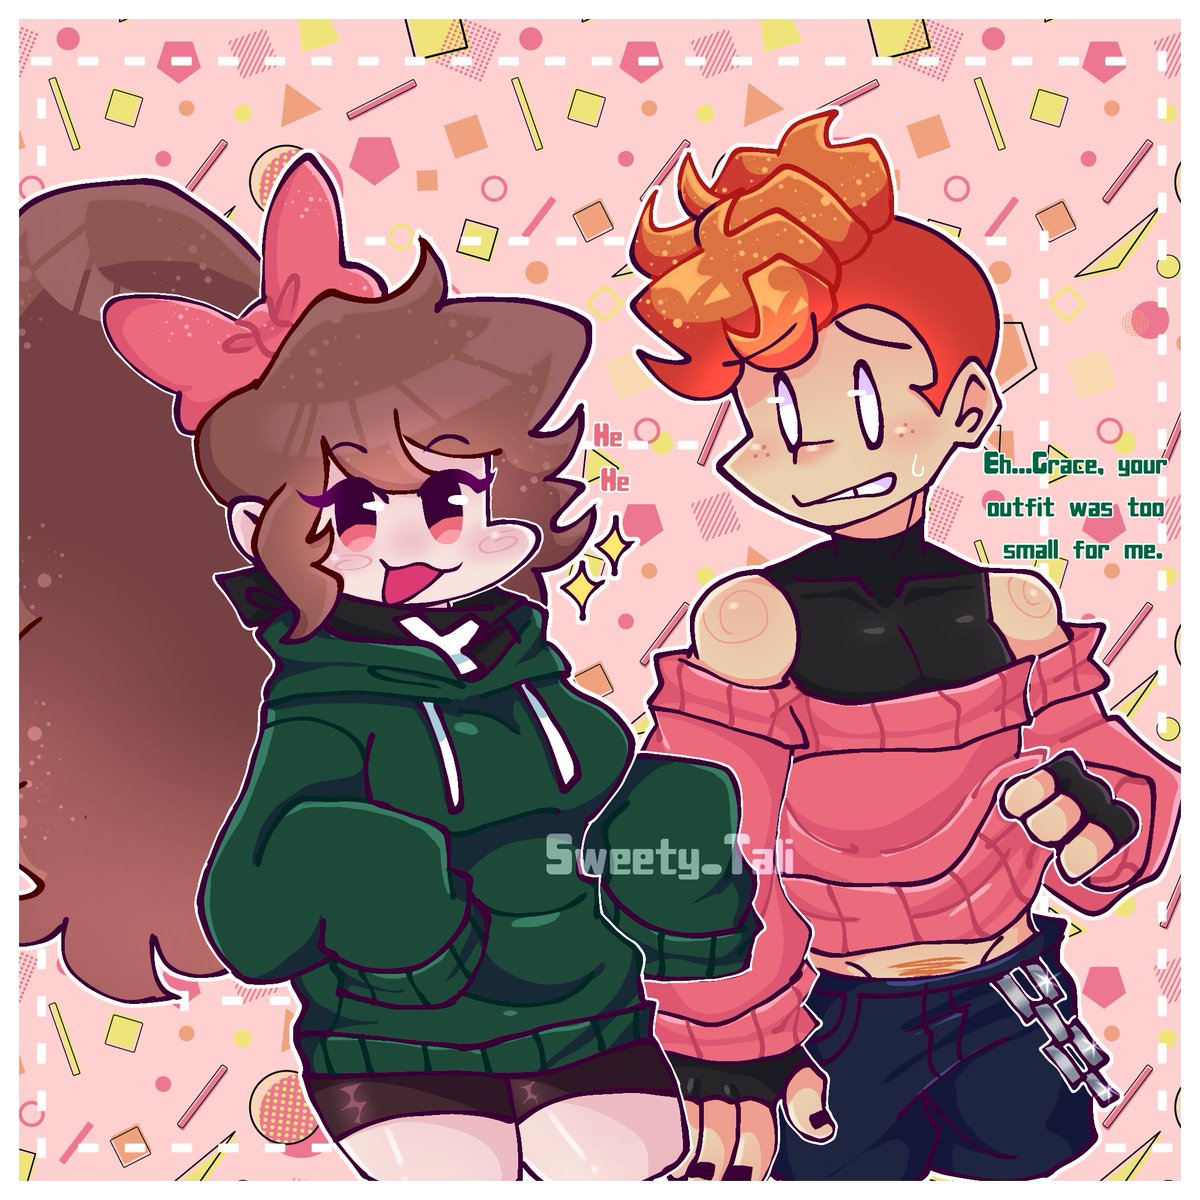 Besties✨💖💕

hehe Grace Asked pico if they could change clothes lmao!!I thought of an au that pico and grace they are Best childhood friends along with Benjamim.✨💖💕
#fnf
#fnfsoft 
#fnfau